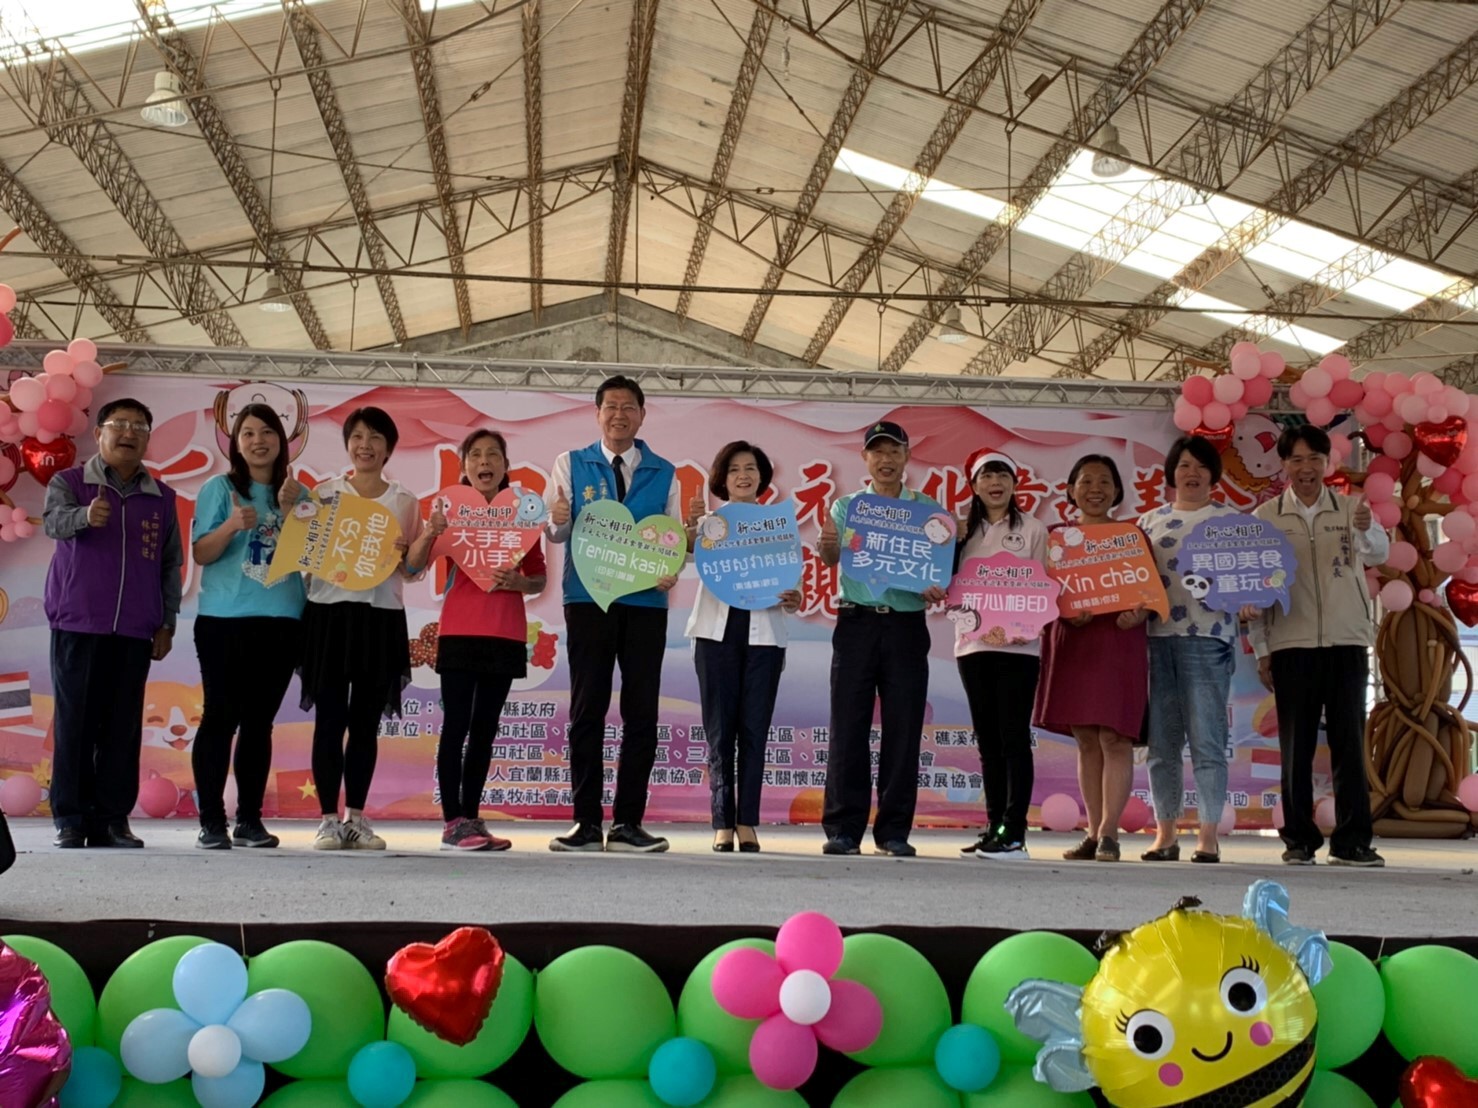 Yilan County Government held the event for the new resident/ Yilan County Government website photo